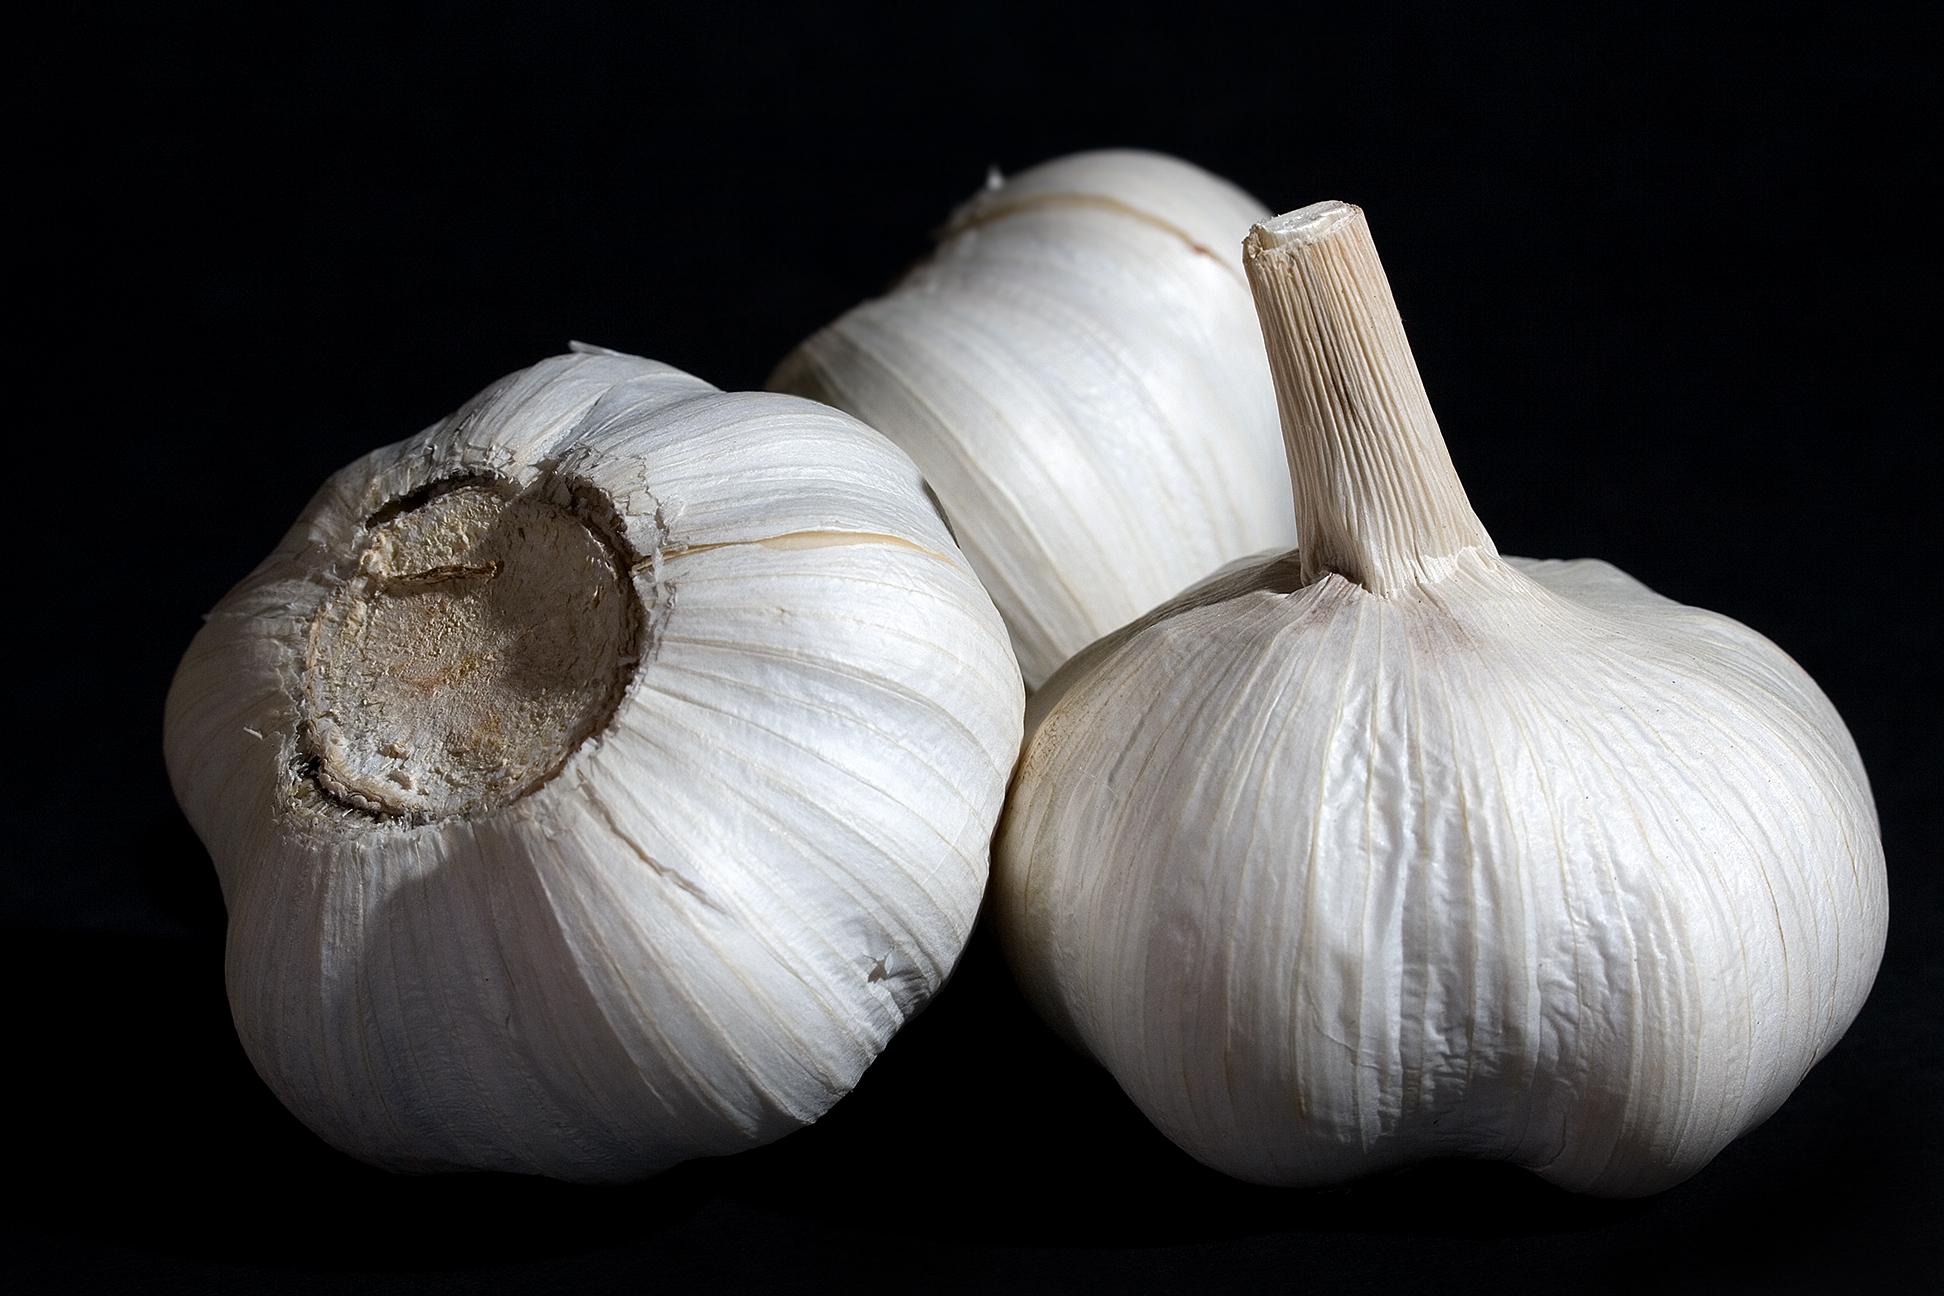 Peeling Large Amounts of Garlic: A Step-by-Step Guide